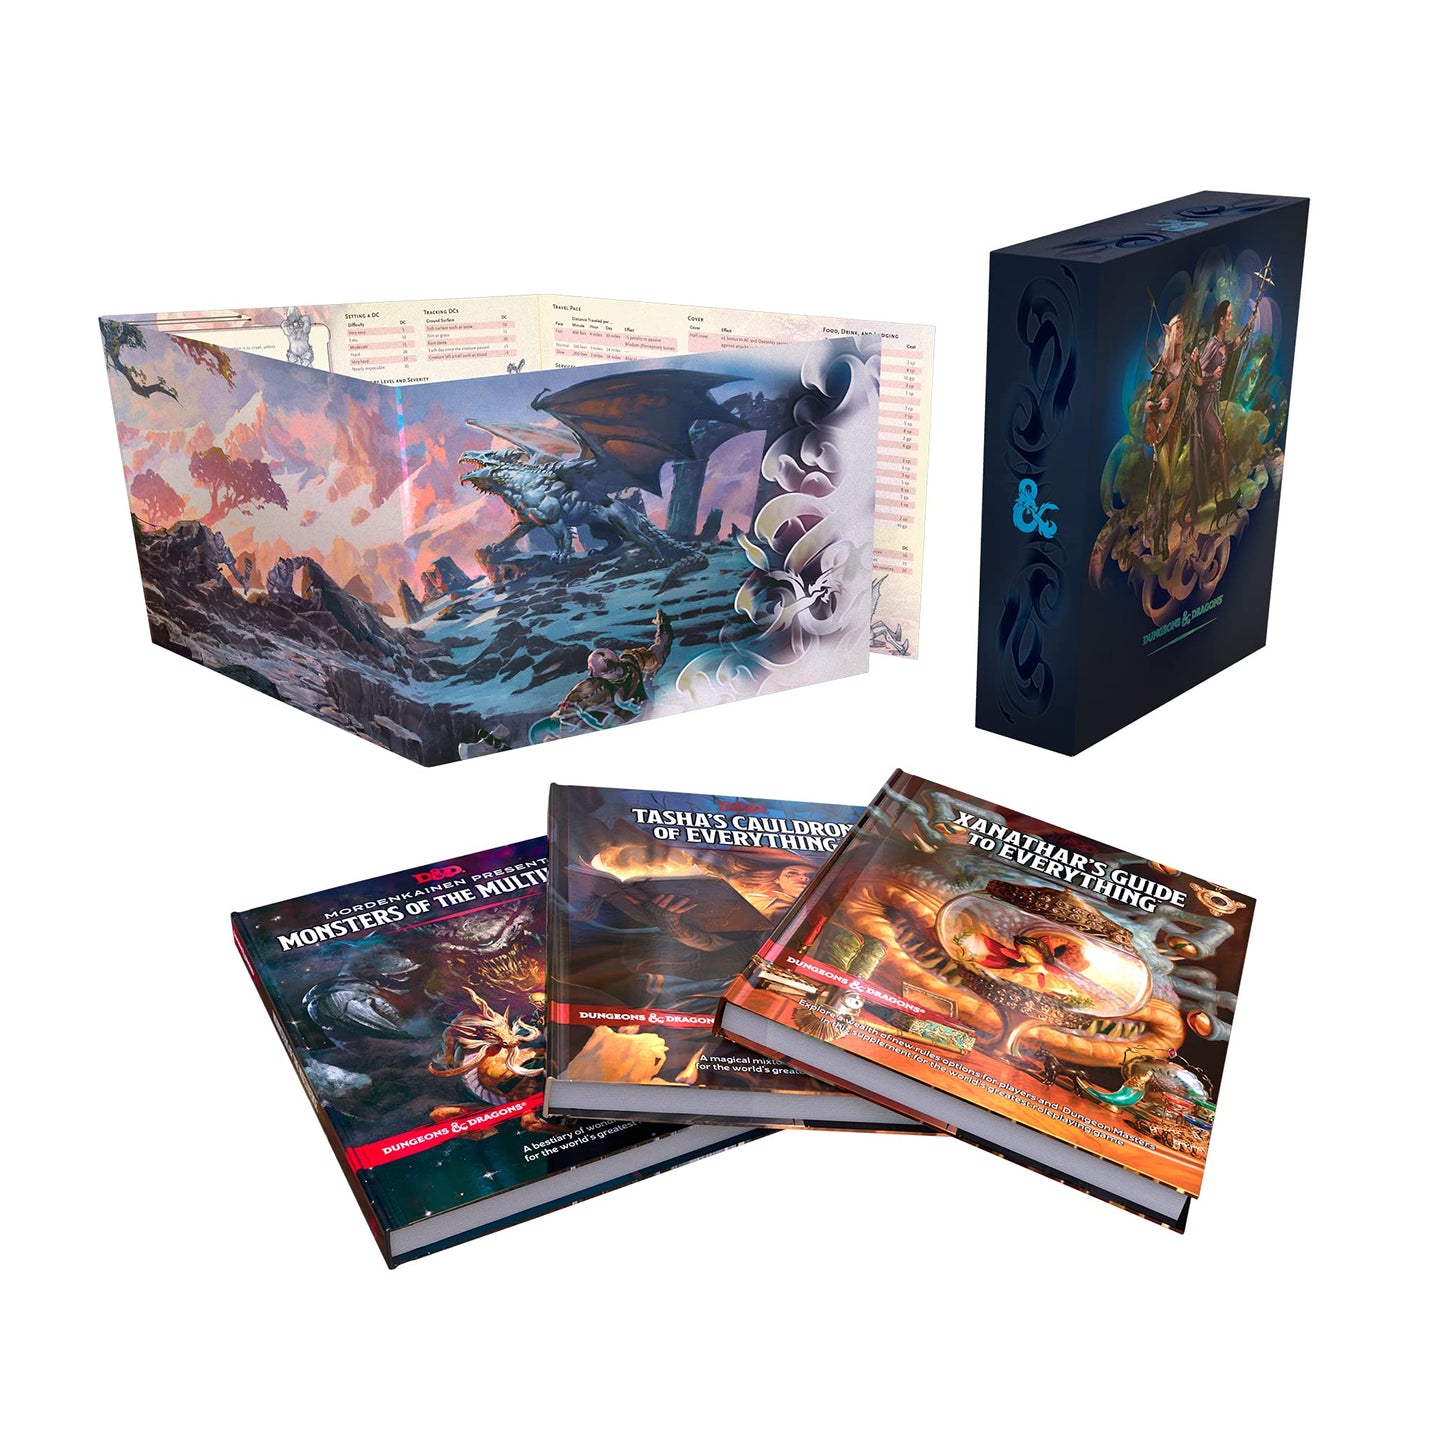 Dungeons & Dragons Rules Expansion Gift Set (D&D Books) Regular Edition: Tasha's Cauldron of Everything + Xanathar's Guide to Everything + Monsters of the Multiverse + DM Screen